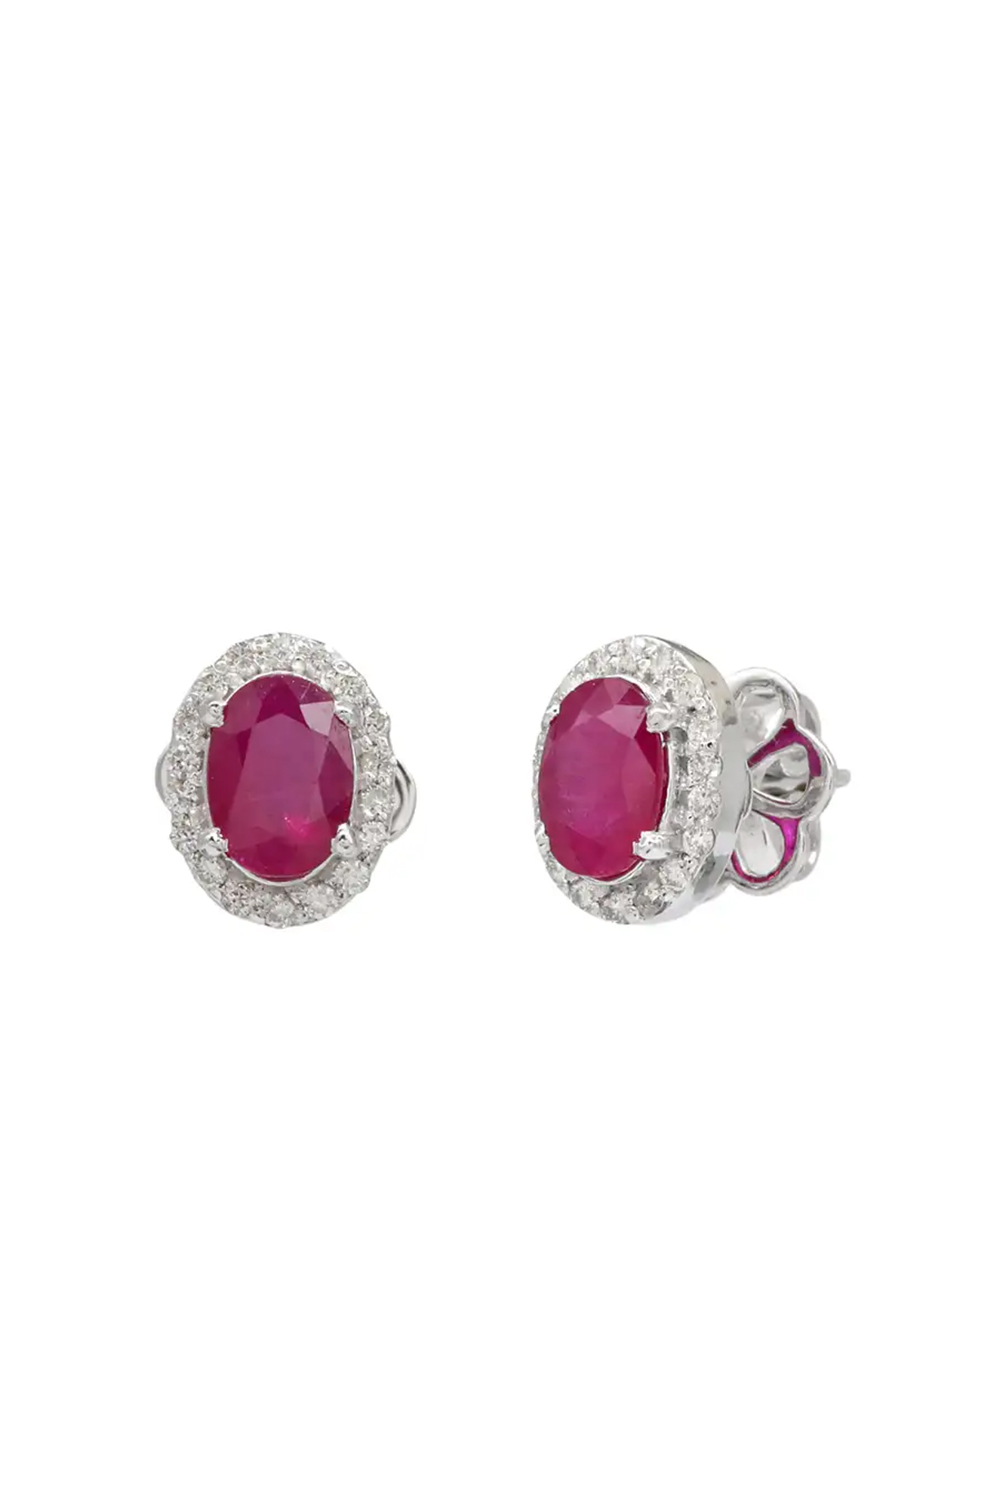 18k gold 0.23cts Diamond & 1.65cts Ruby Earring